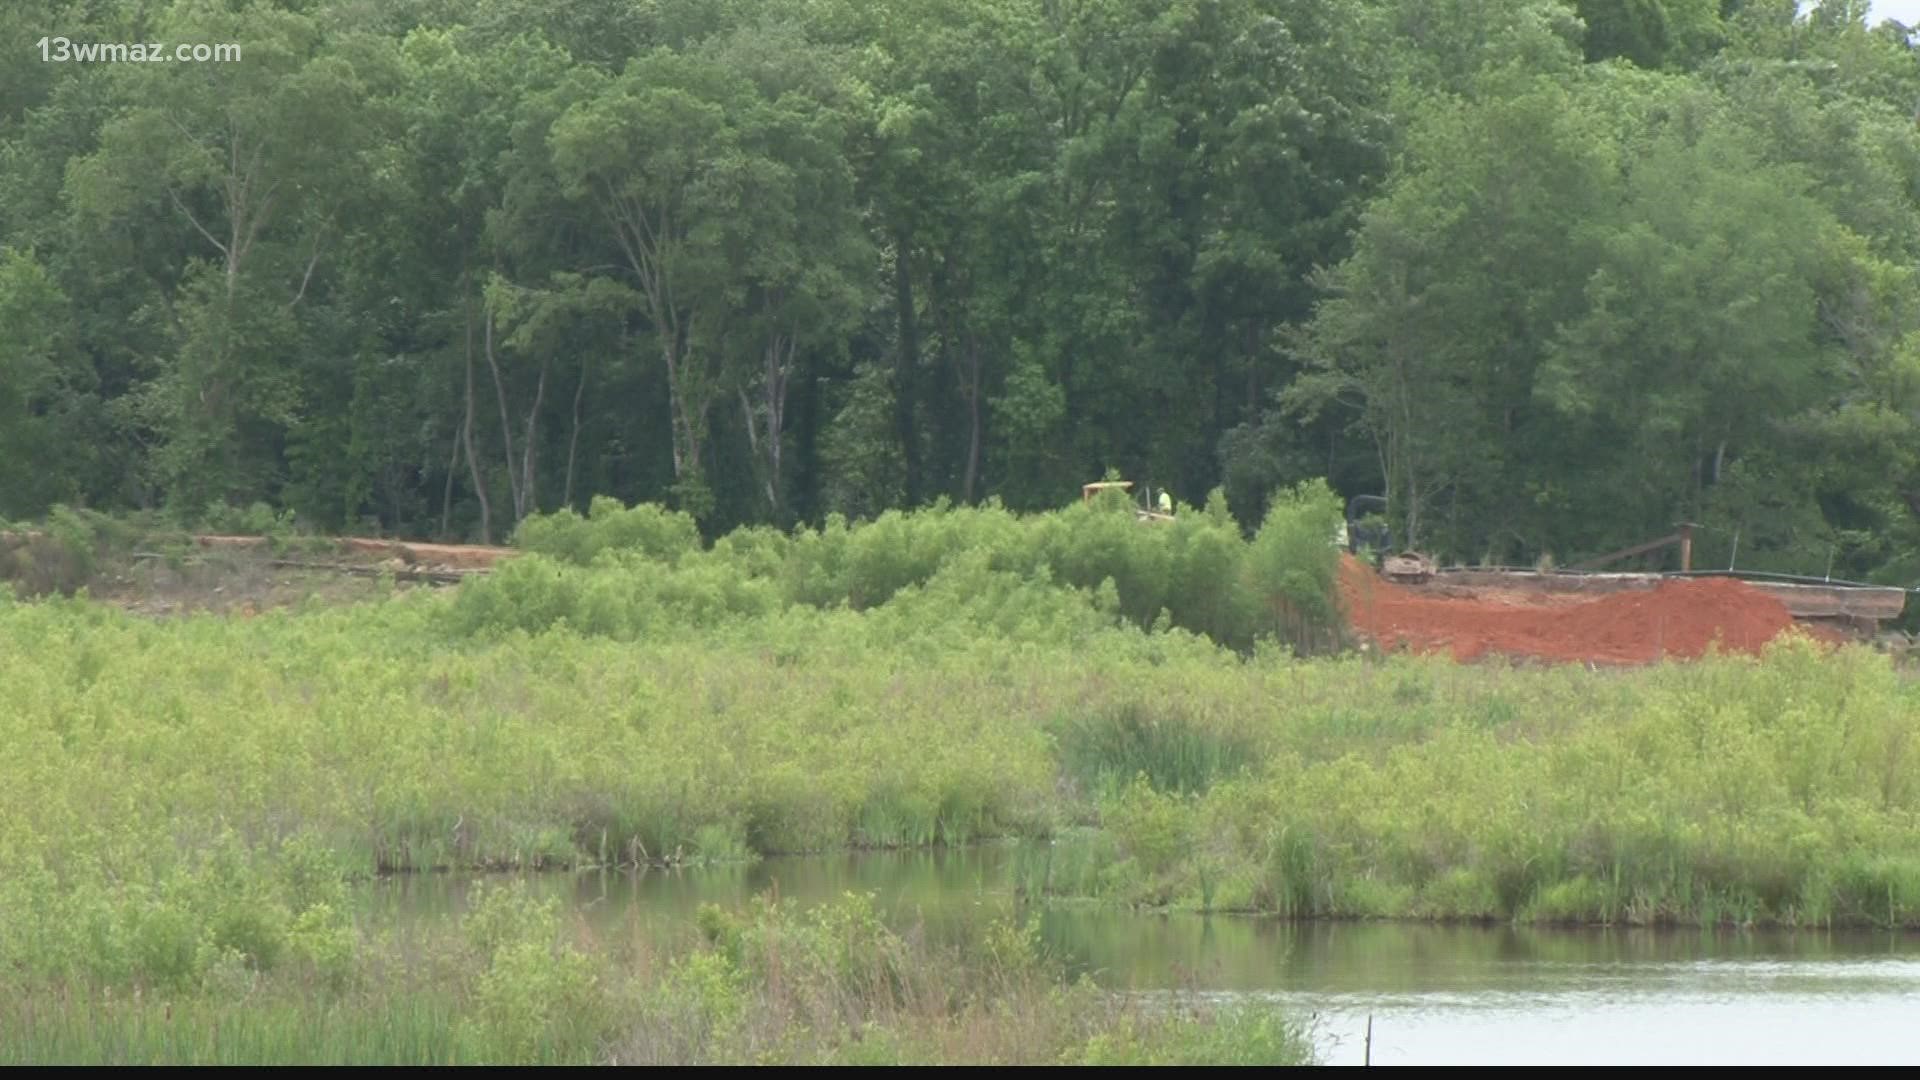 After two years of fundraising, a contractor will begin work on the dam that failed two years ago.